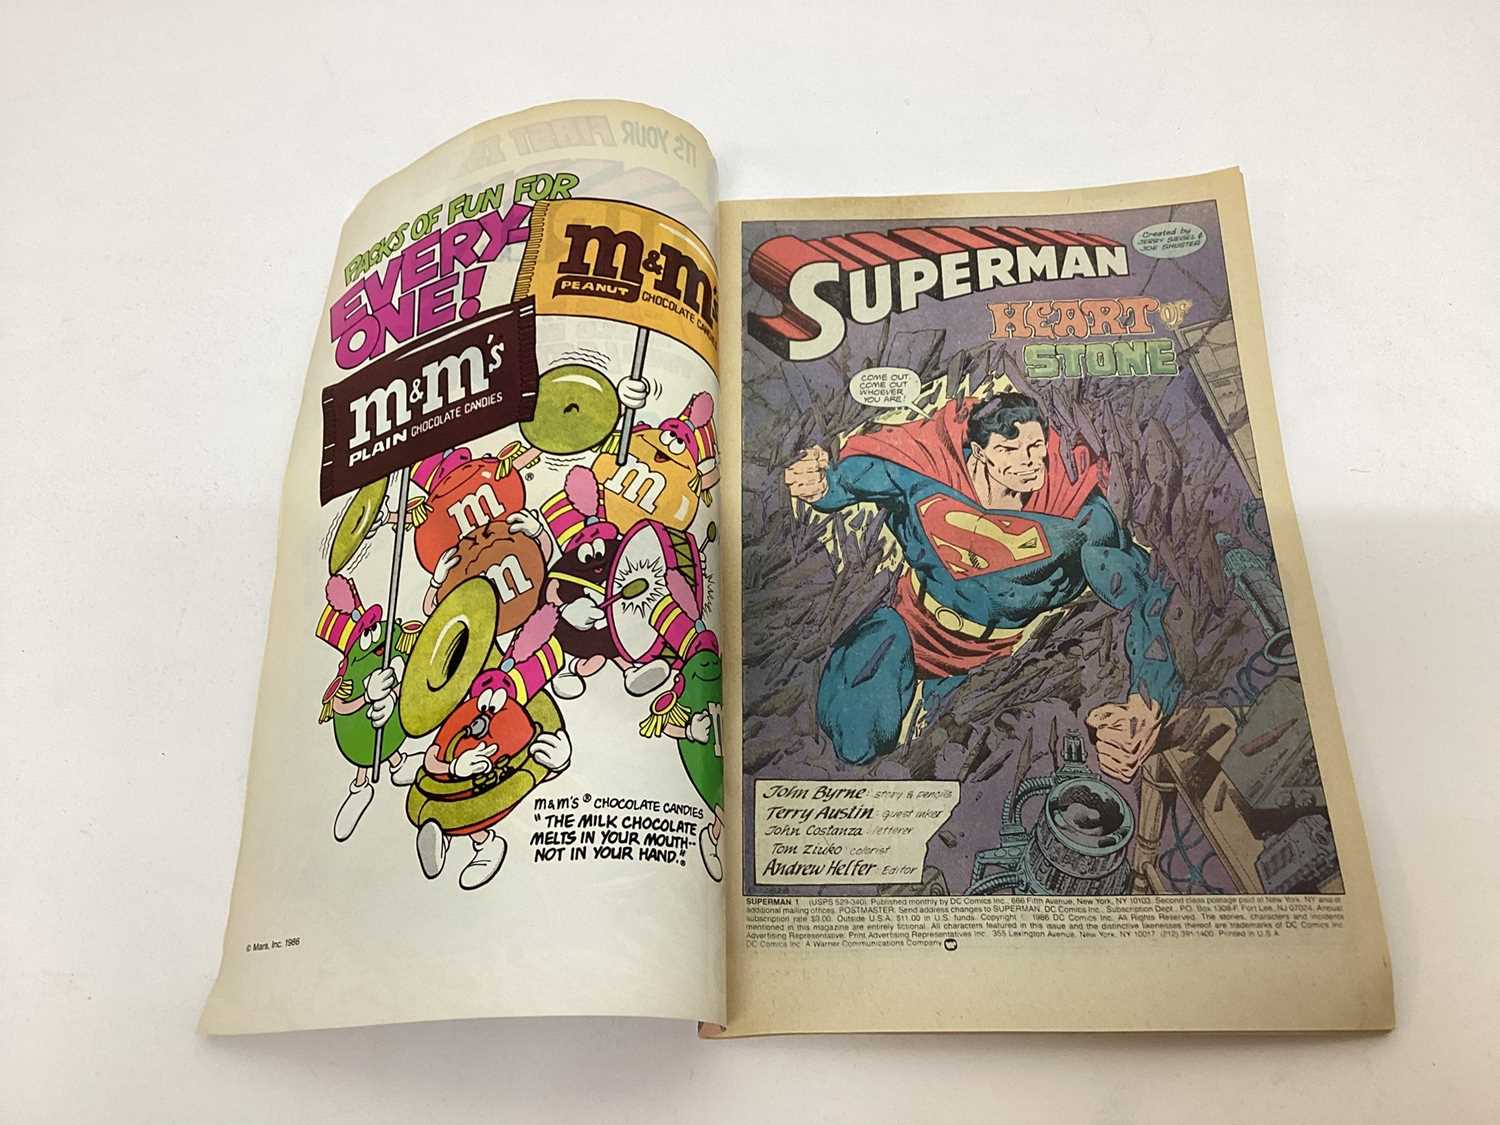 Large quantity of 1980's and 90's DC Comics, Superman to include #1, #4 1st appearance of Bloodsport - Image 5 of 11